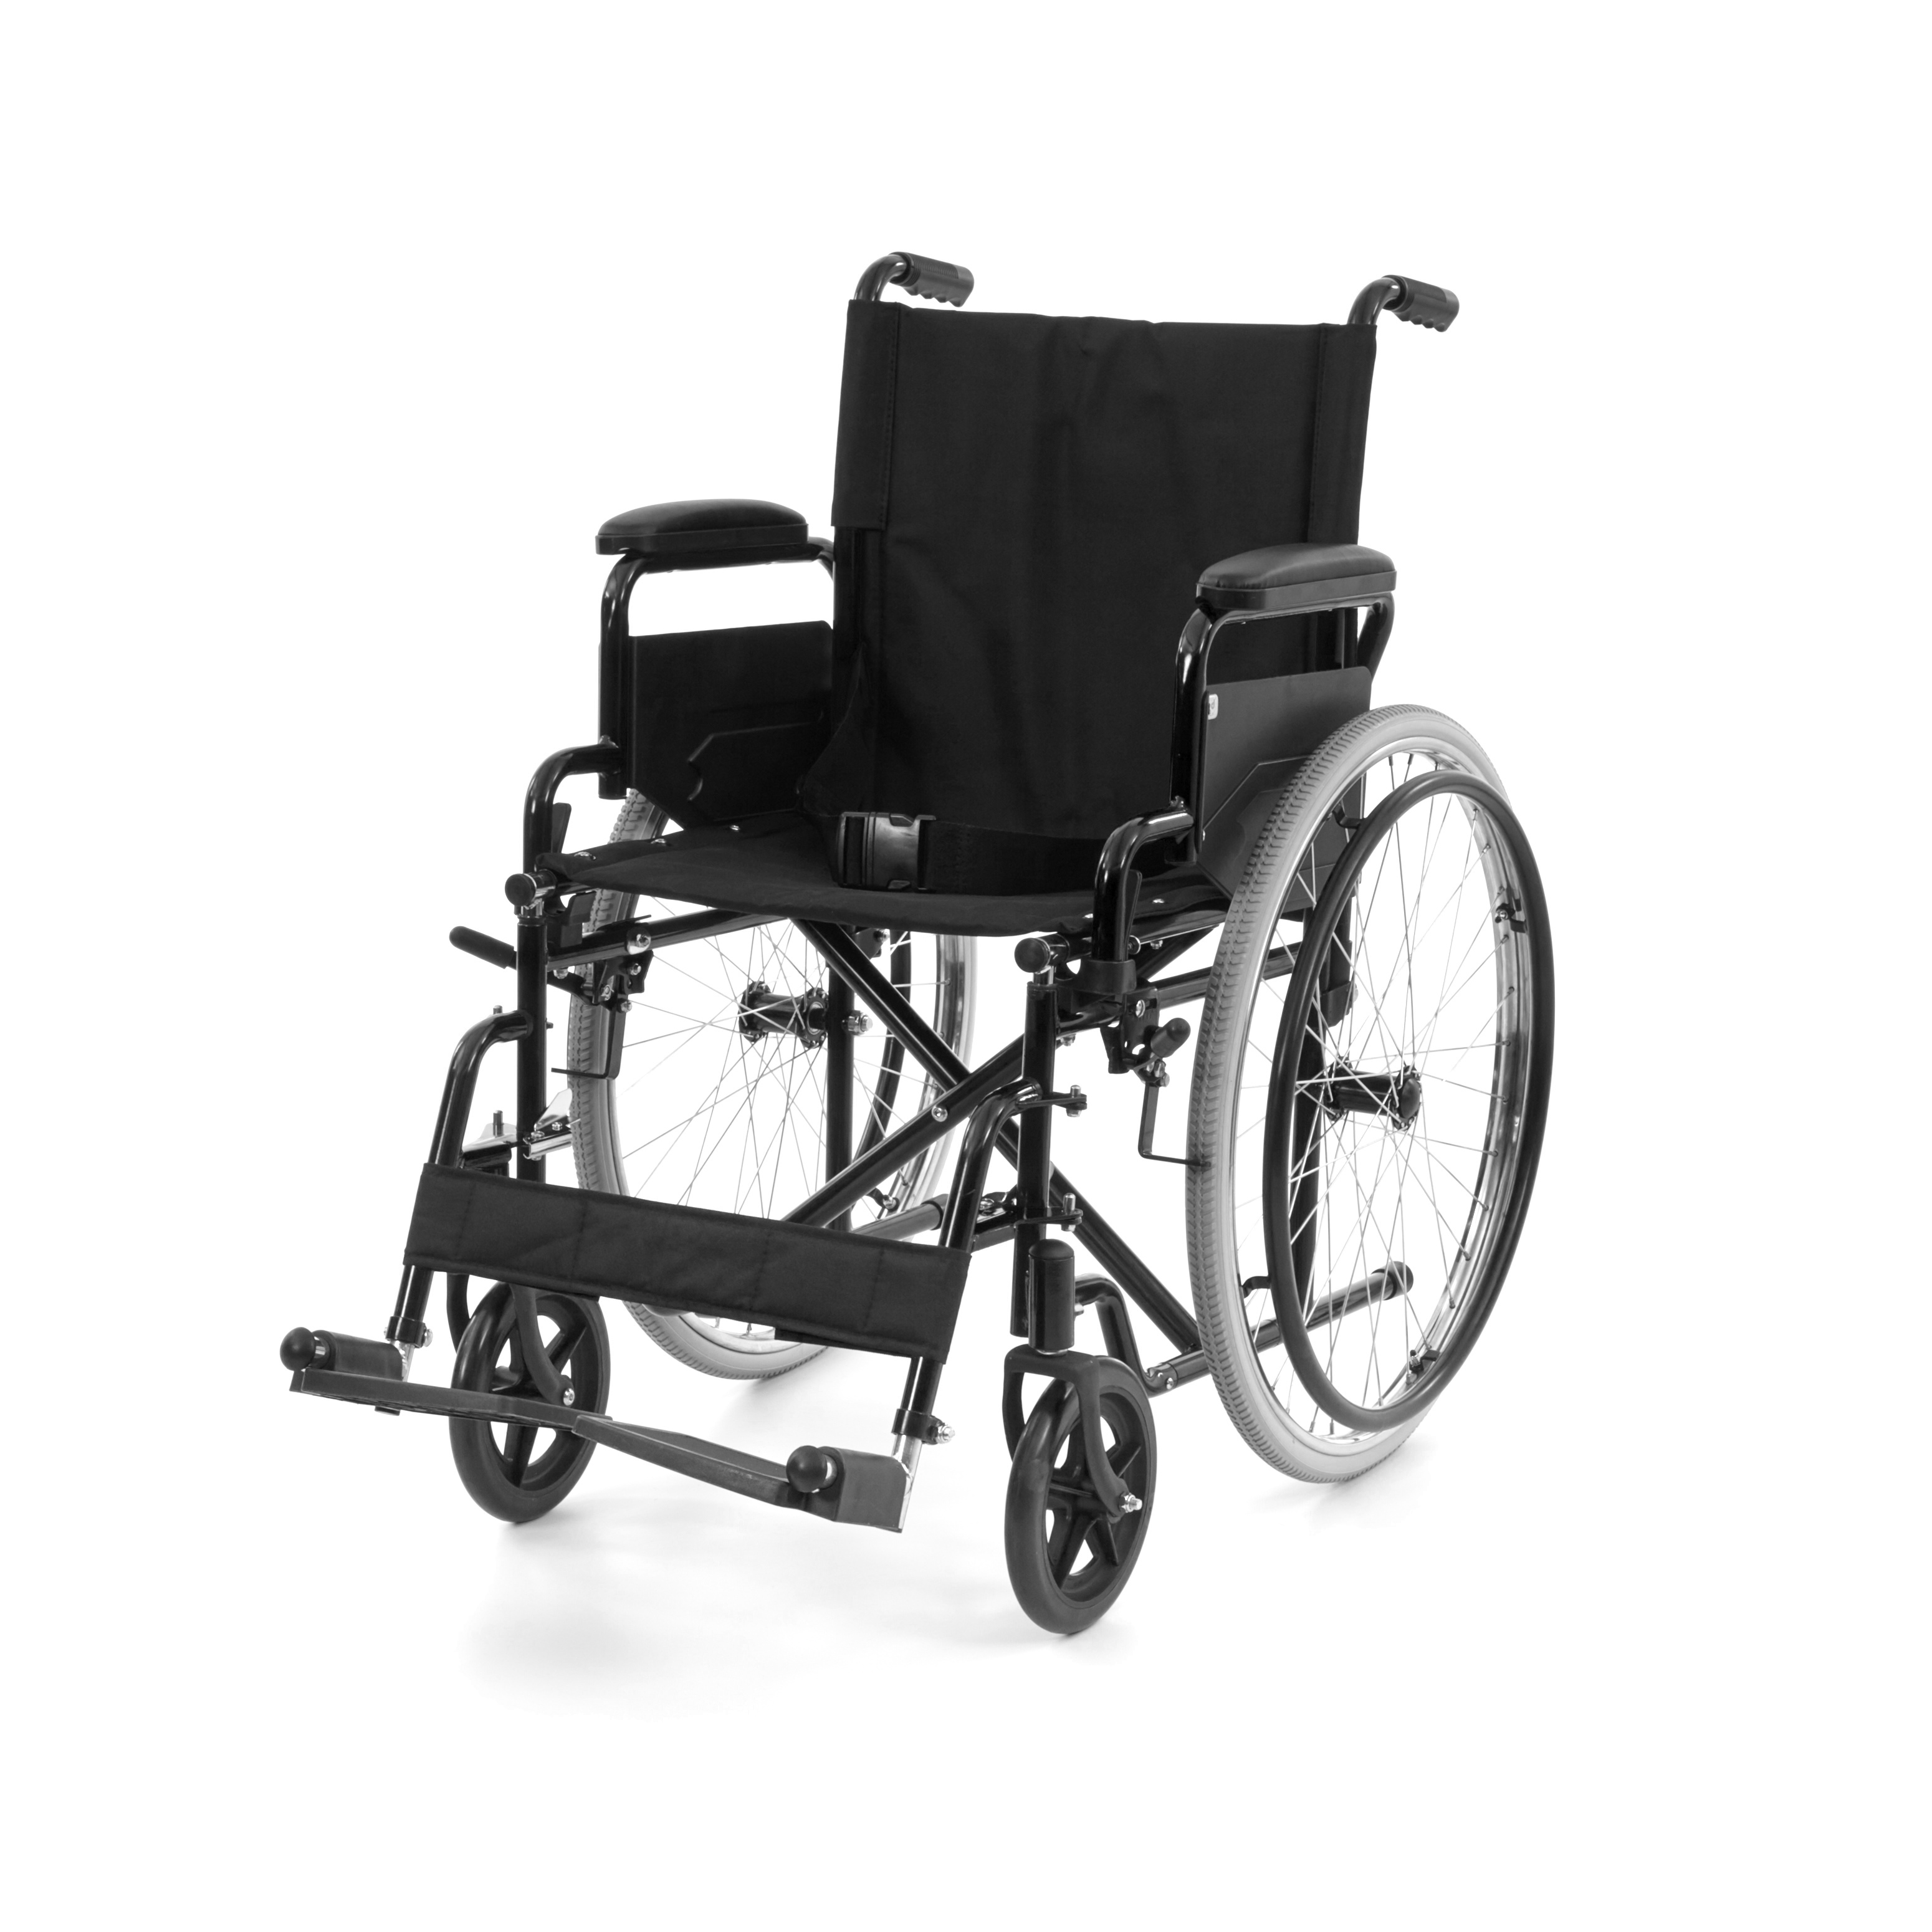 WHE-01-BLACK Romed foldable manual wheelchair with flip-up armrest and swing away footrest.